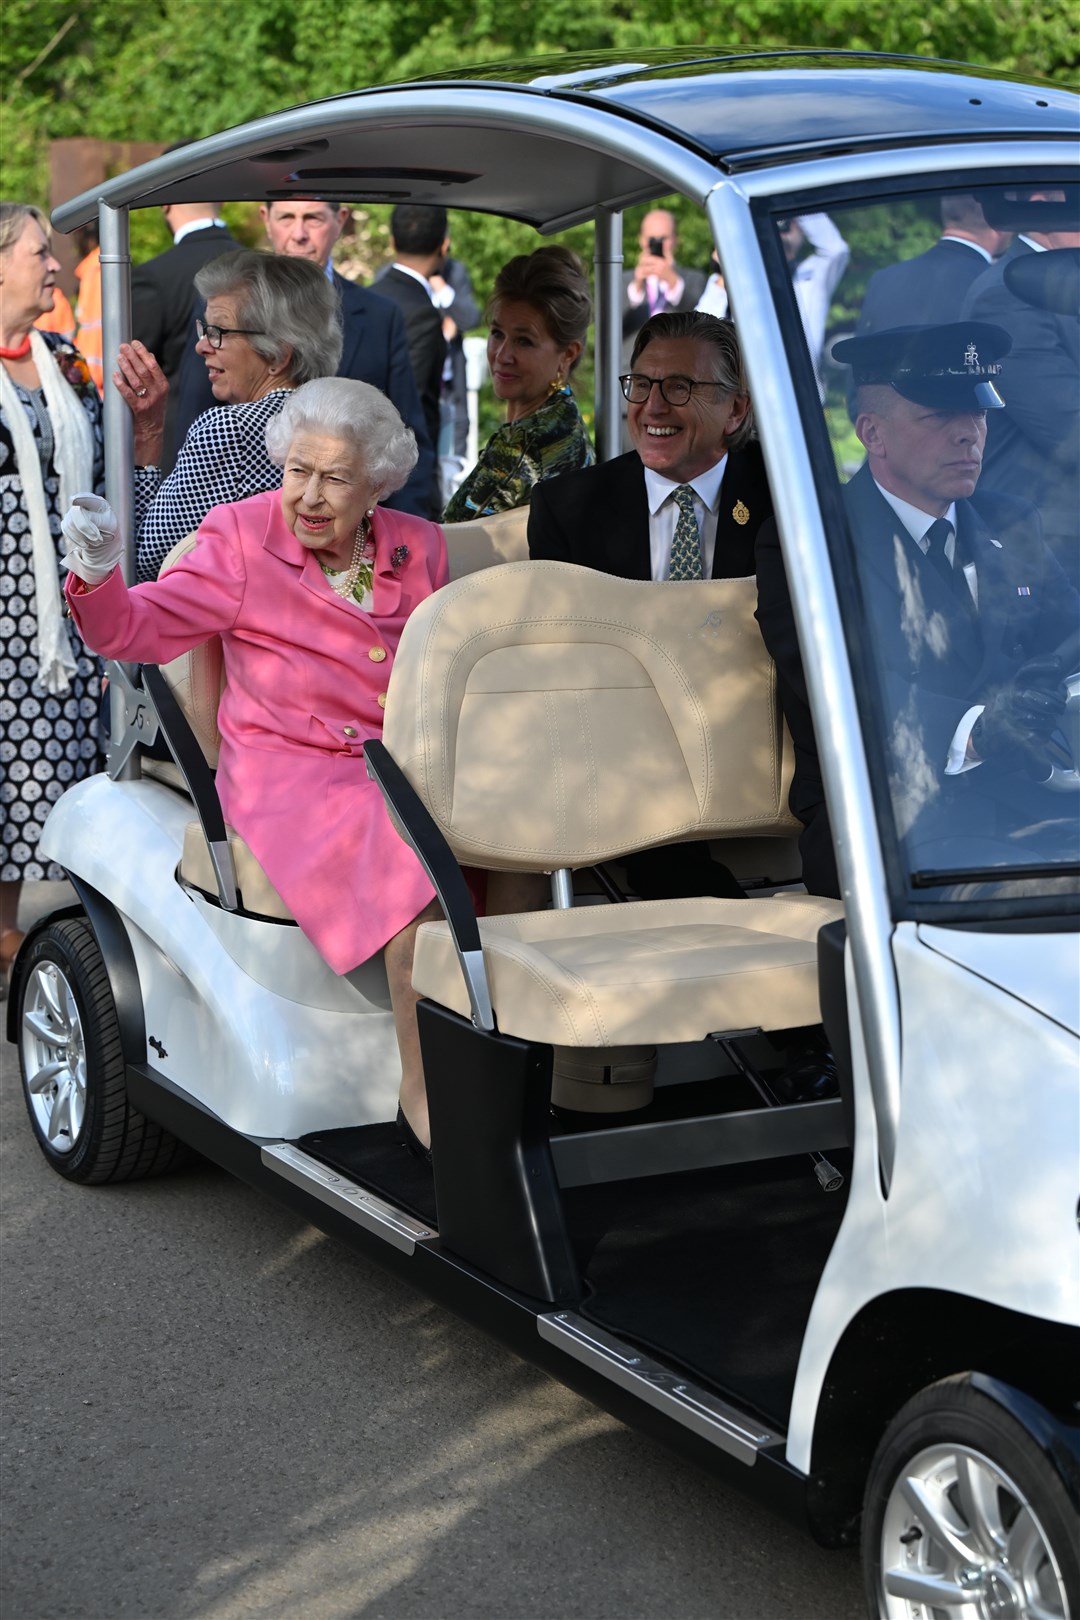 The Queen used a golf buggy to visit the Chelsea Flower Show because of her mobility problems (Paul Grover/Daily Telegraph/PA)